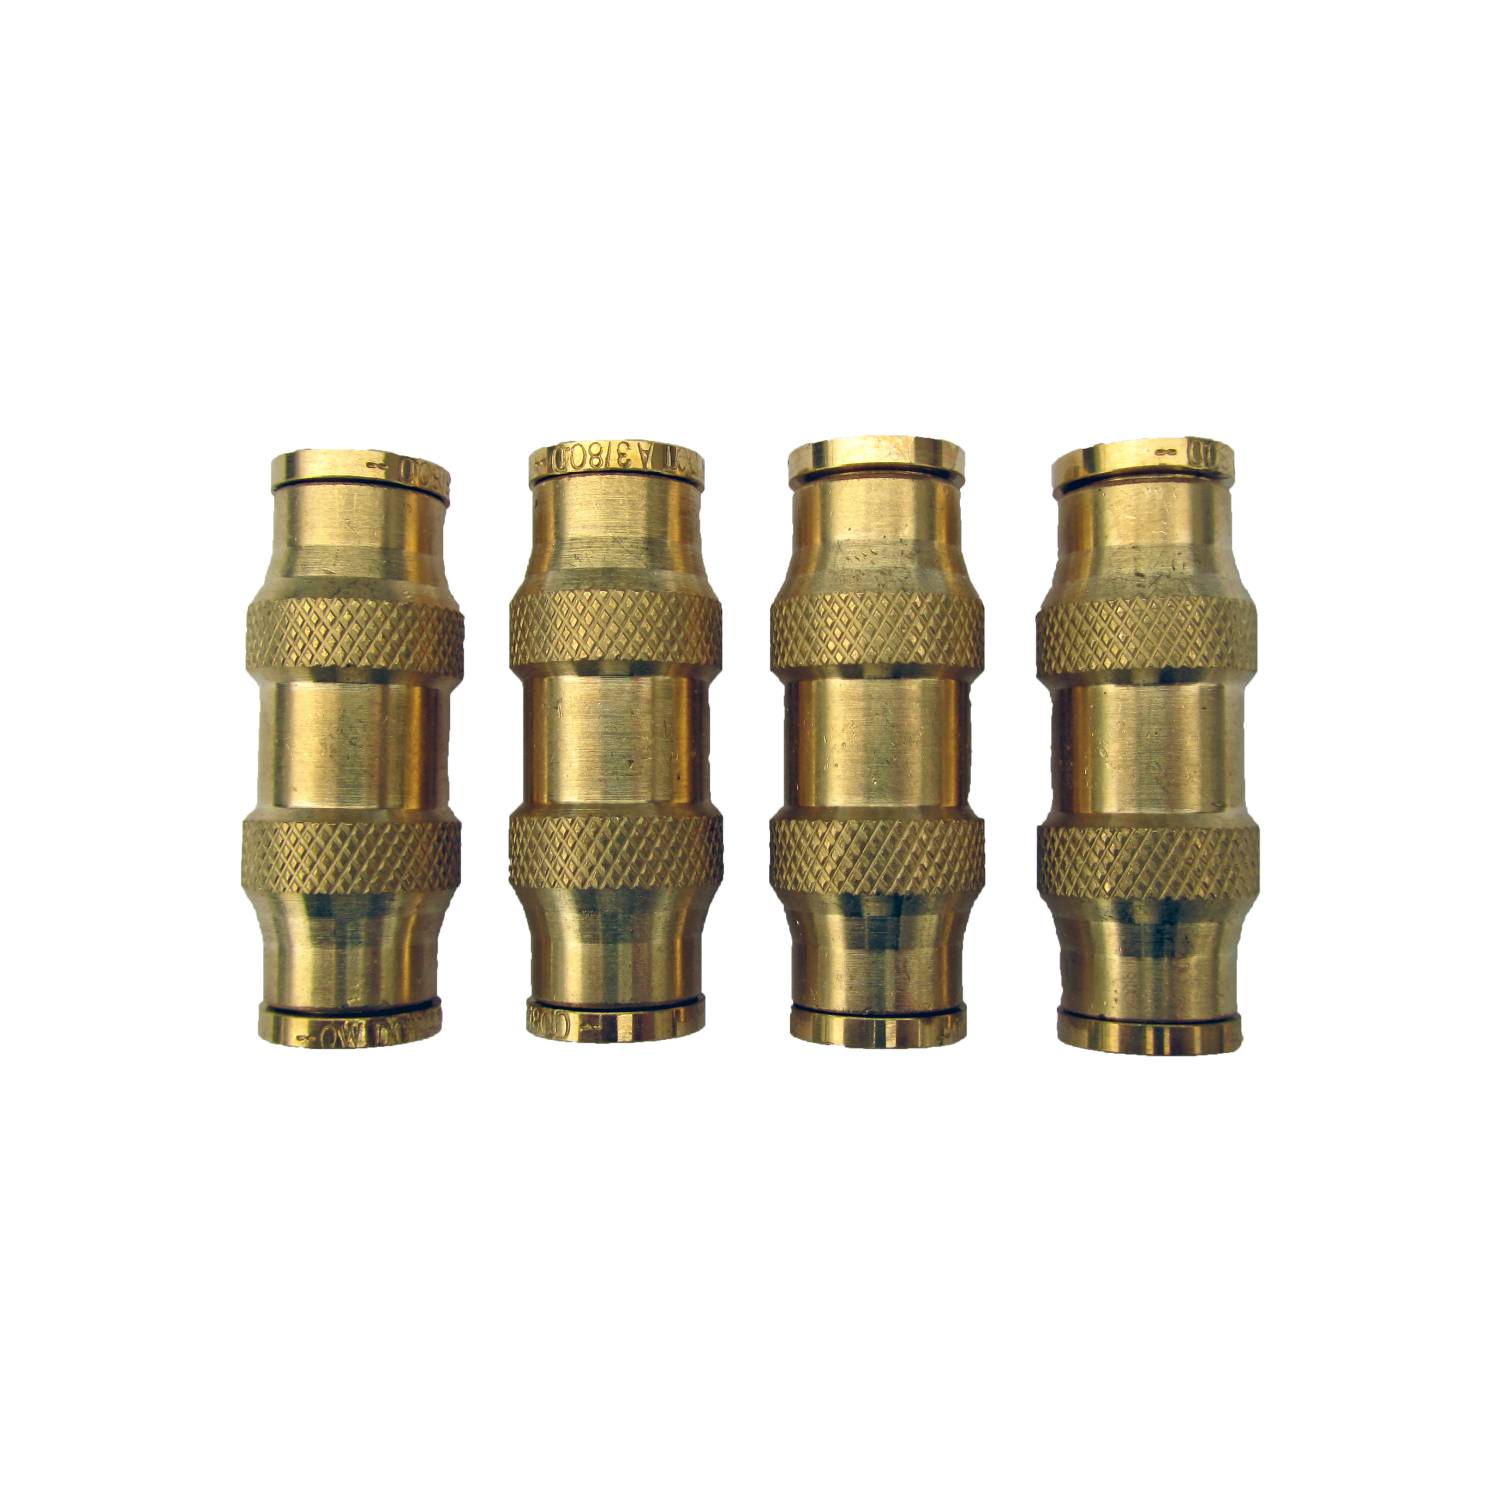 3/8” Brass Push Lock Tube Union, DOT Approved, 4 Pack